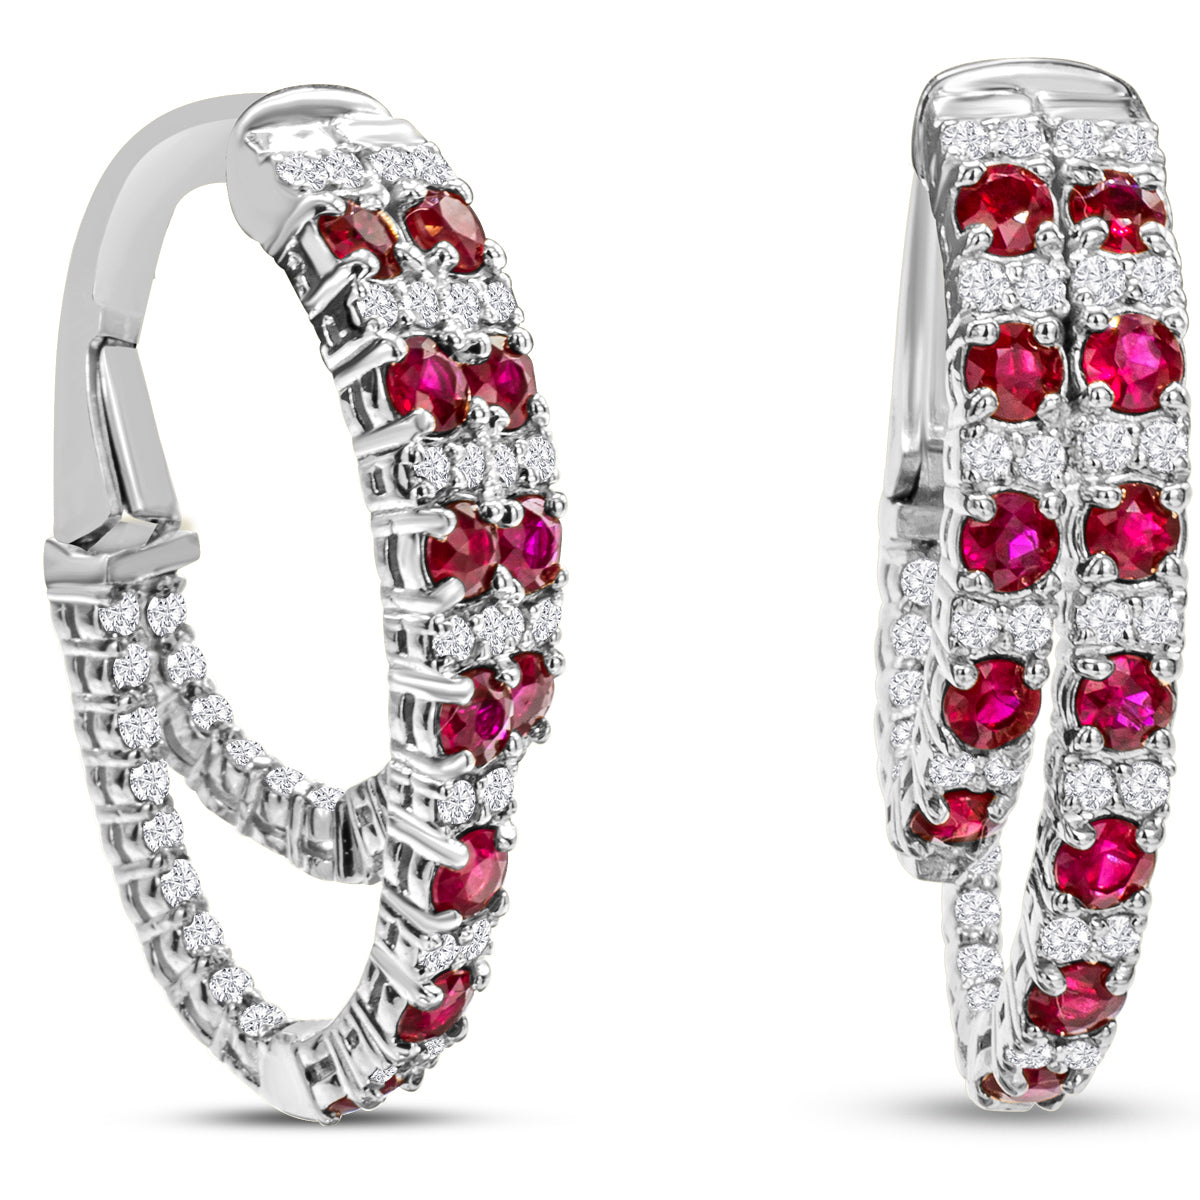 Sselects 2 1/2 Carat Ruby And Diamond Hoop Earrings In 14 Karat White I-j, I1-i2 In Gold